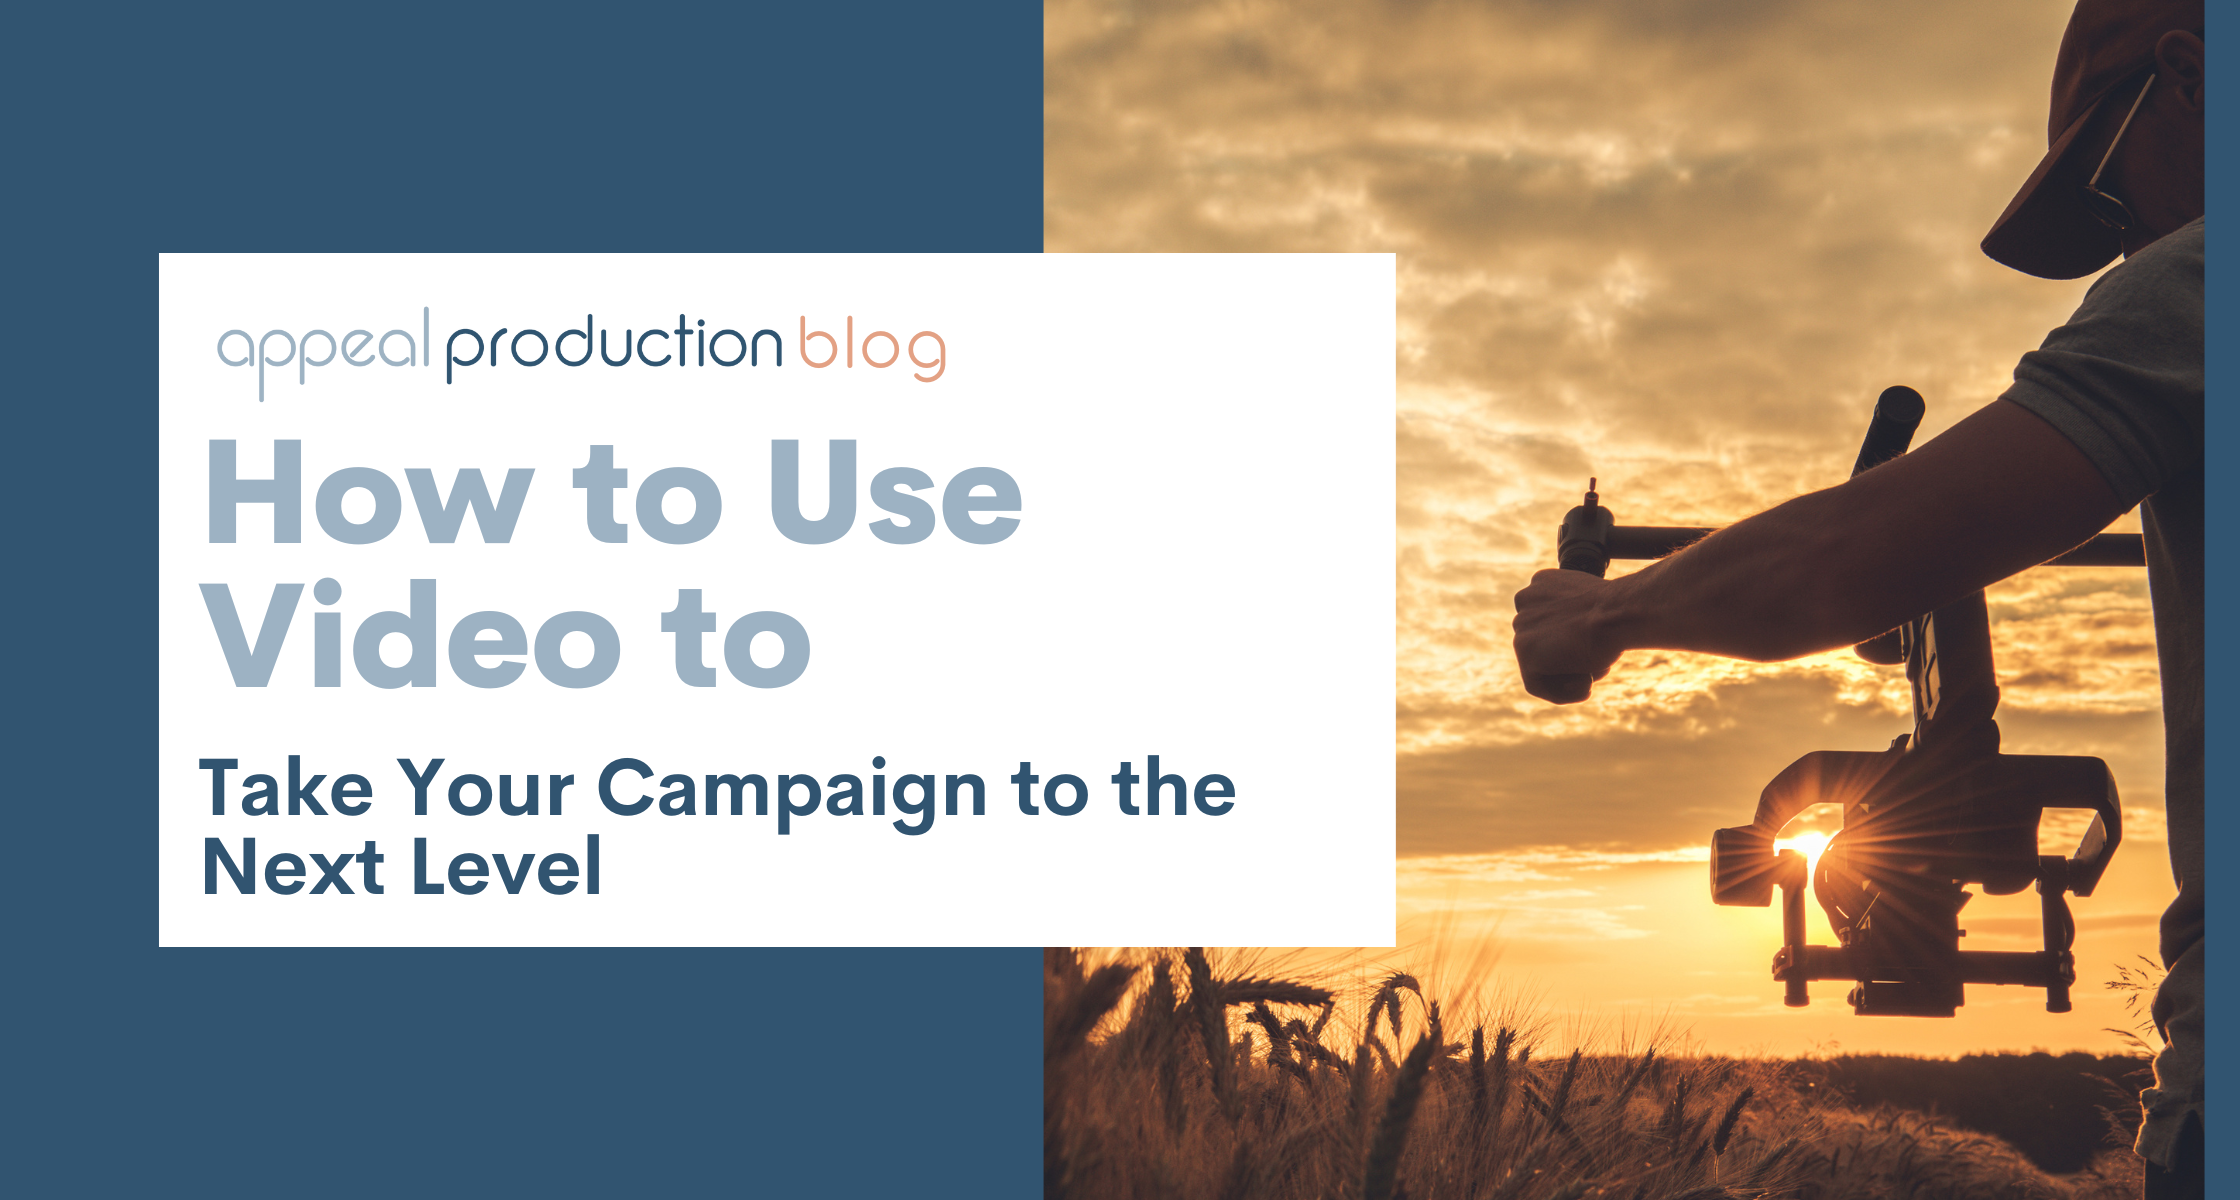 Ways to Use Video for Your Campaign